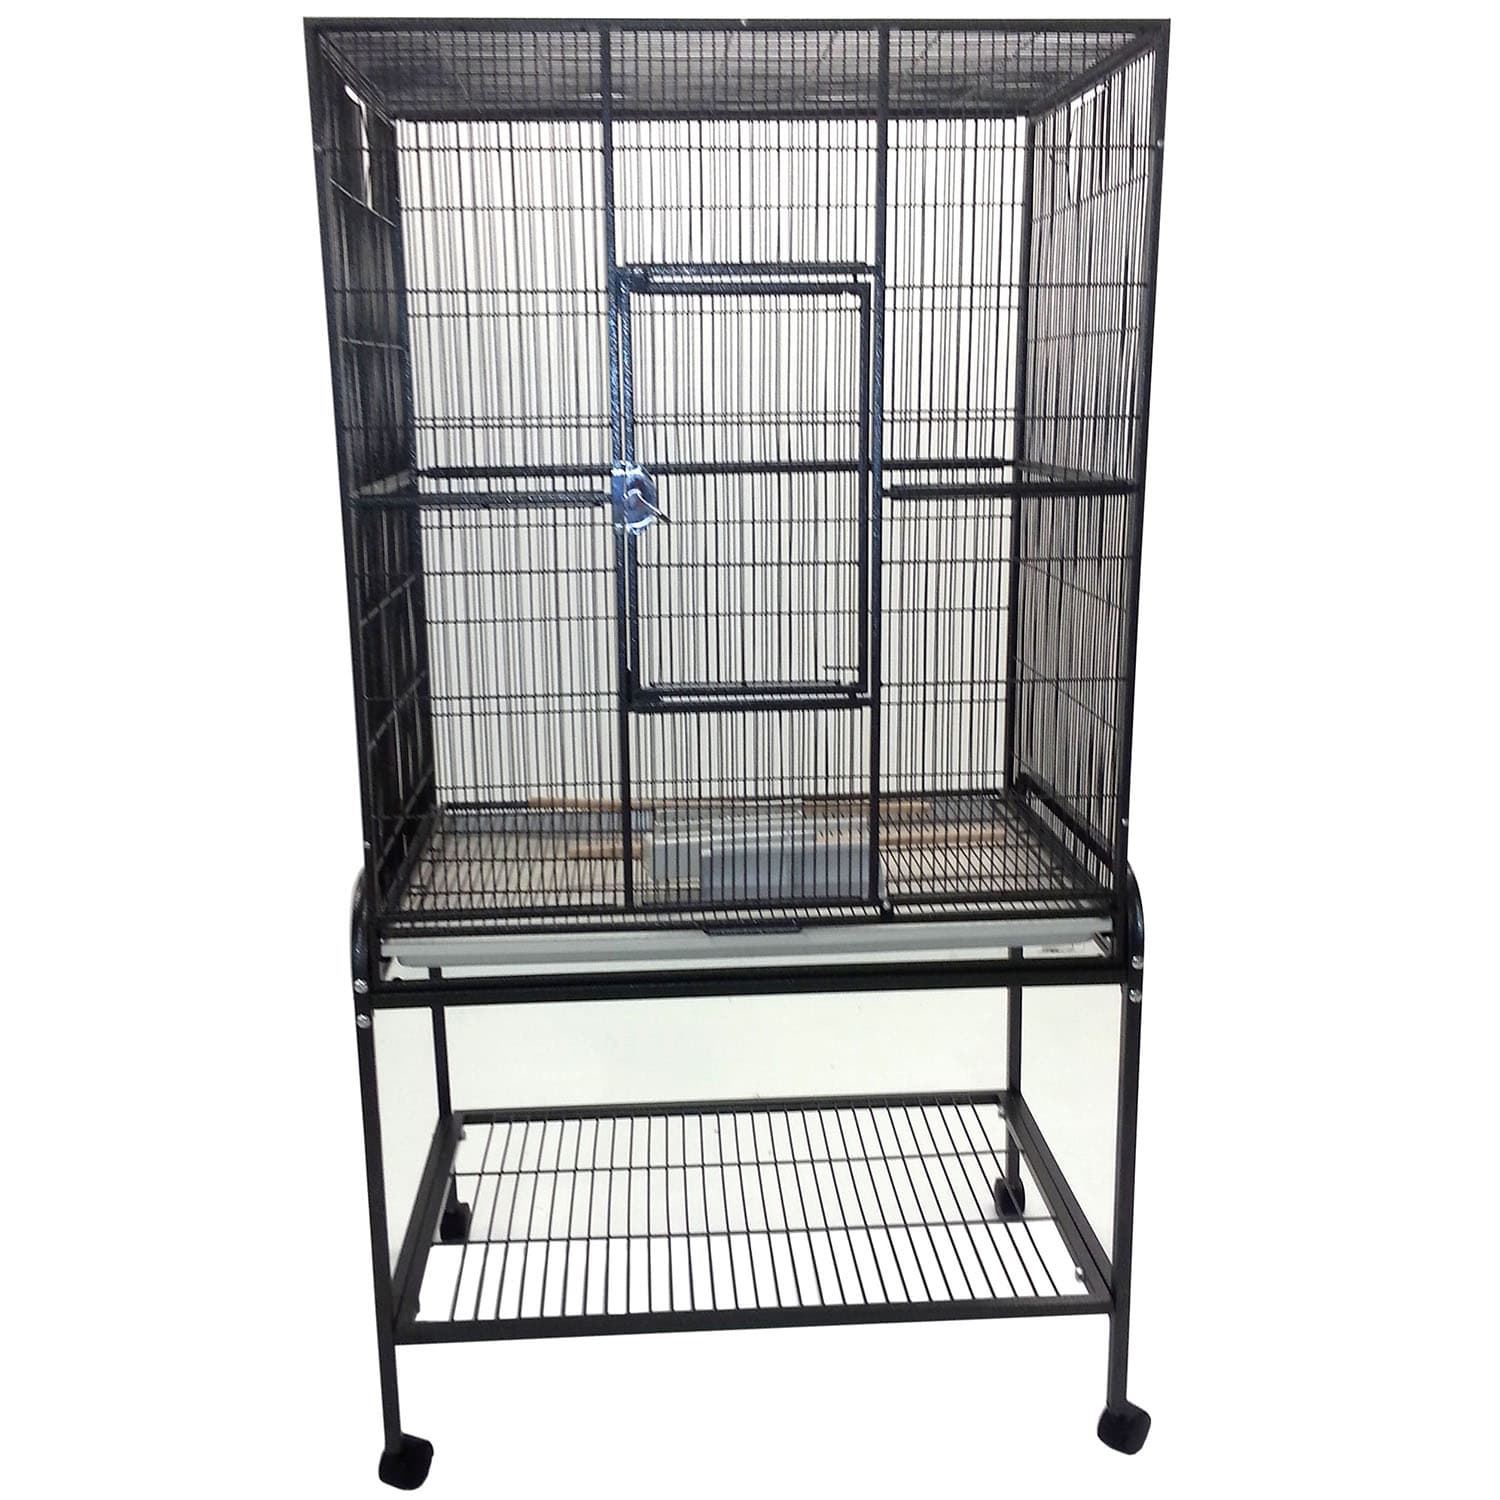 black budgie cage